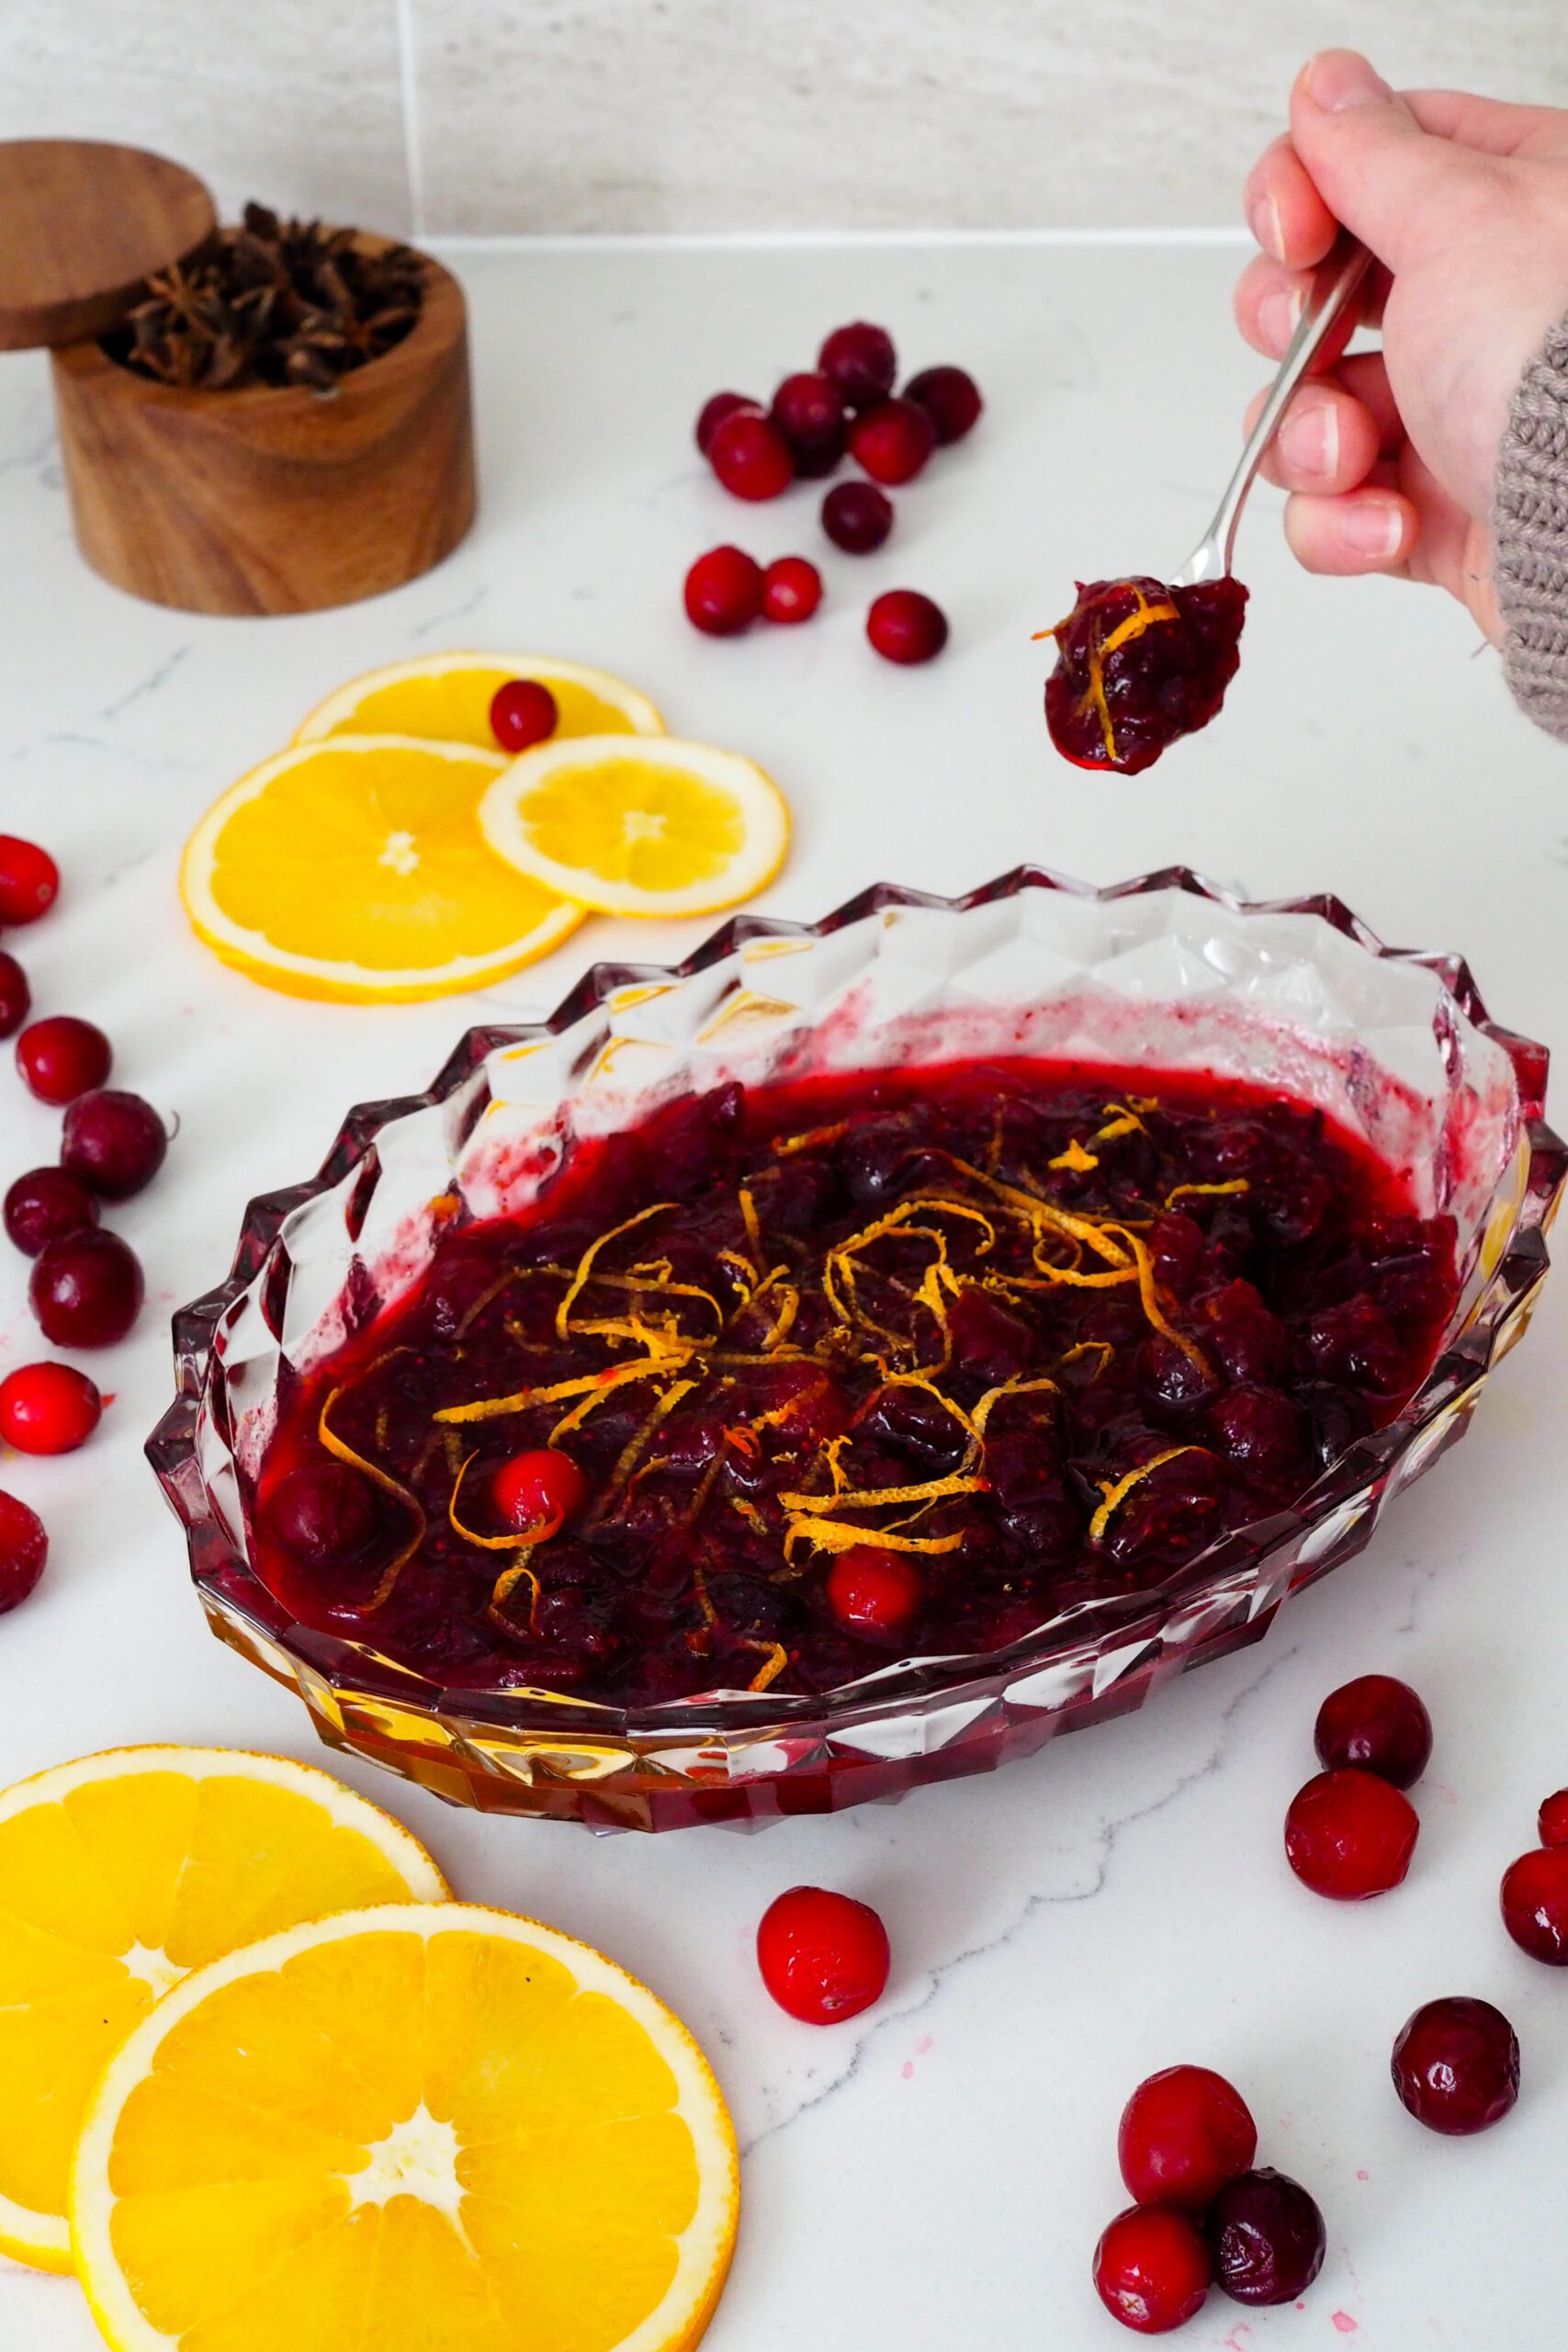 A hand scoops a small serving of cranberry sauce out of a crystal serving dish.